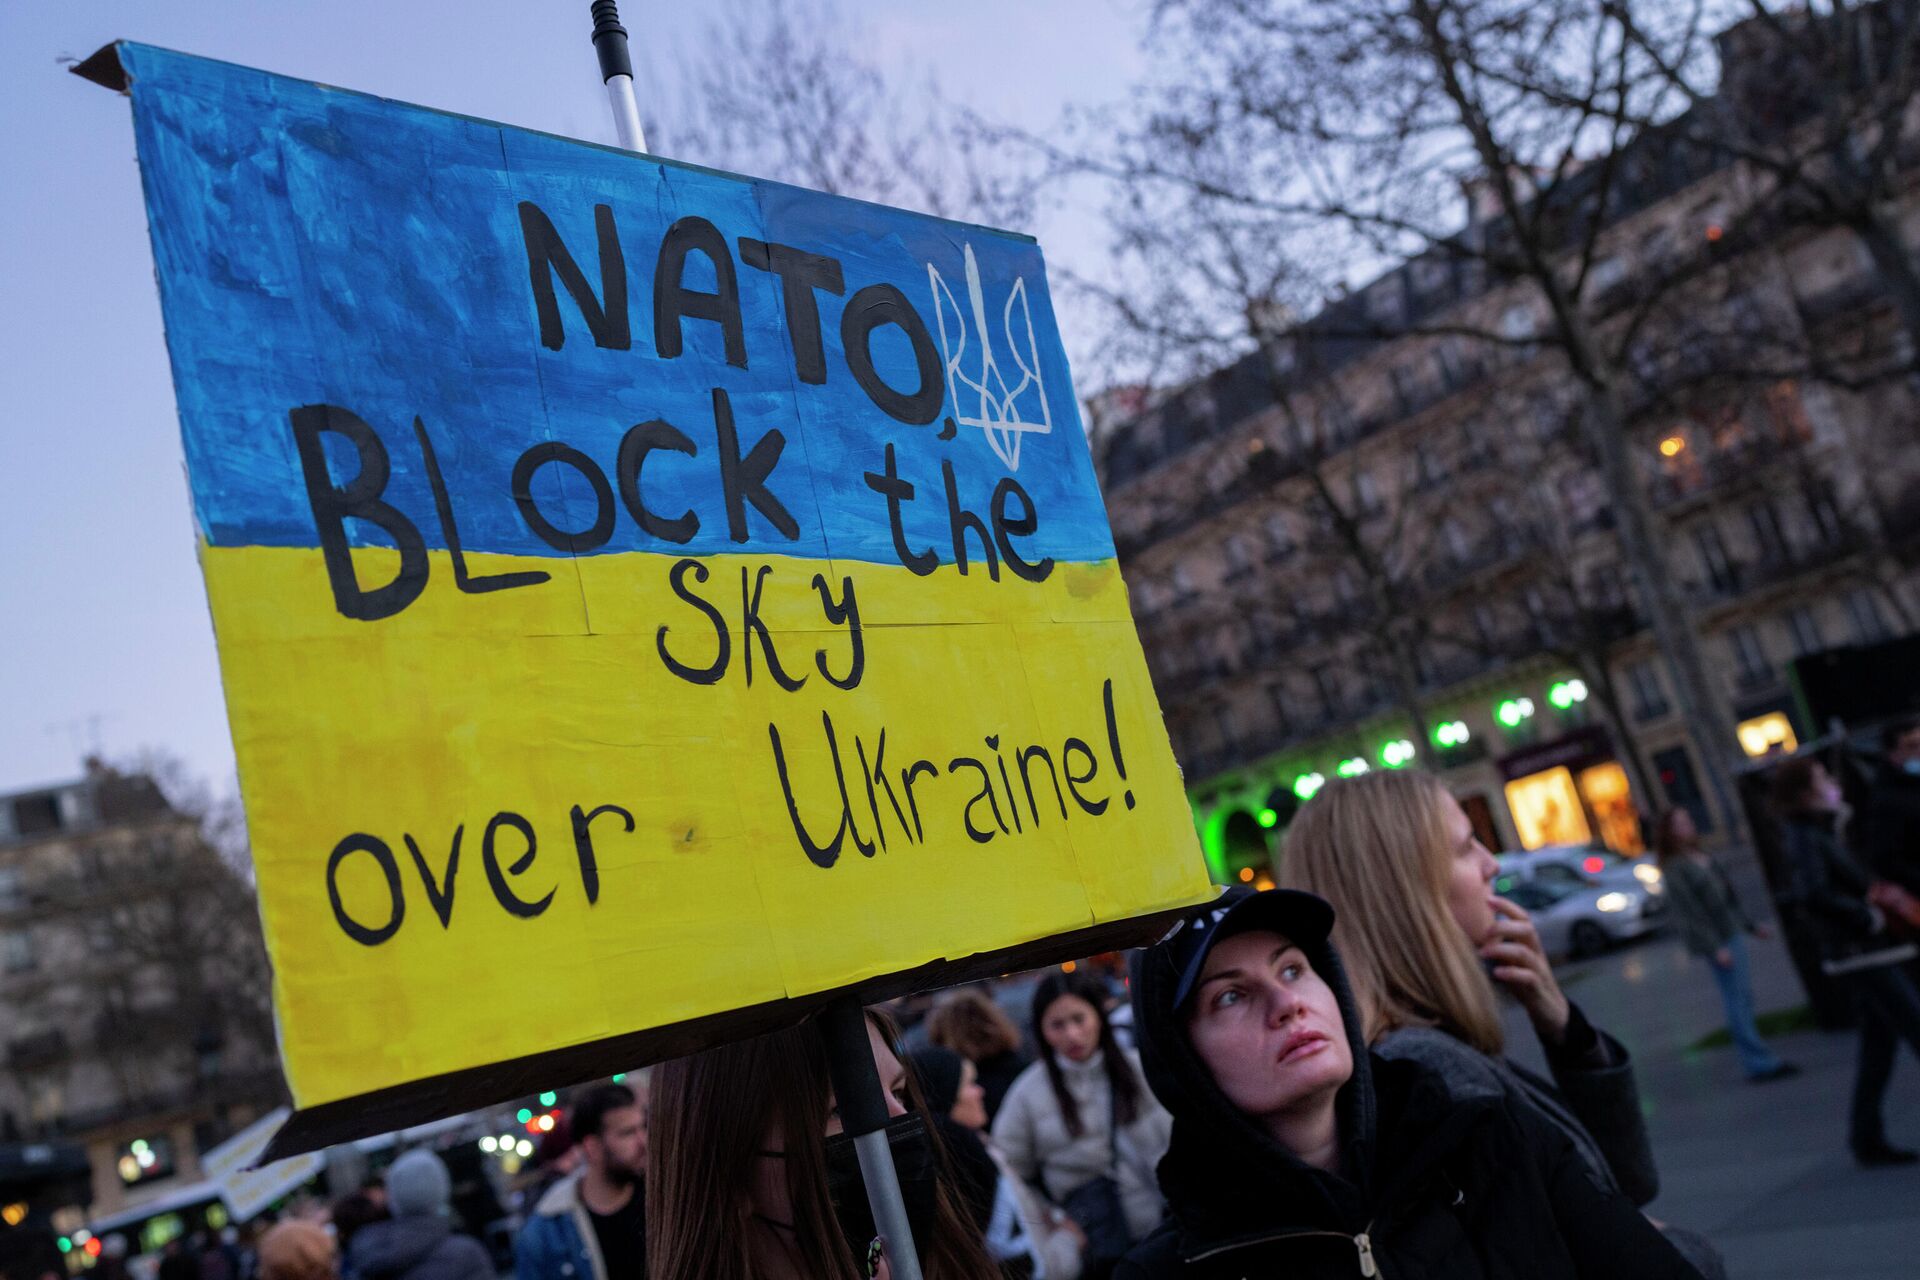 A protestor calls for on NATO to enforce a no-fly zone over the Ukraine during a demonstration in Paris, France, Saturday, Feb. 26, 2022 - Sputnik International, 1920, 16.03.2022